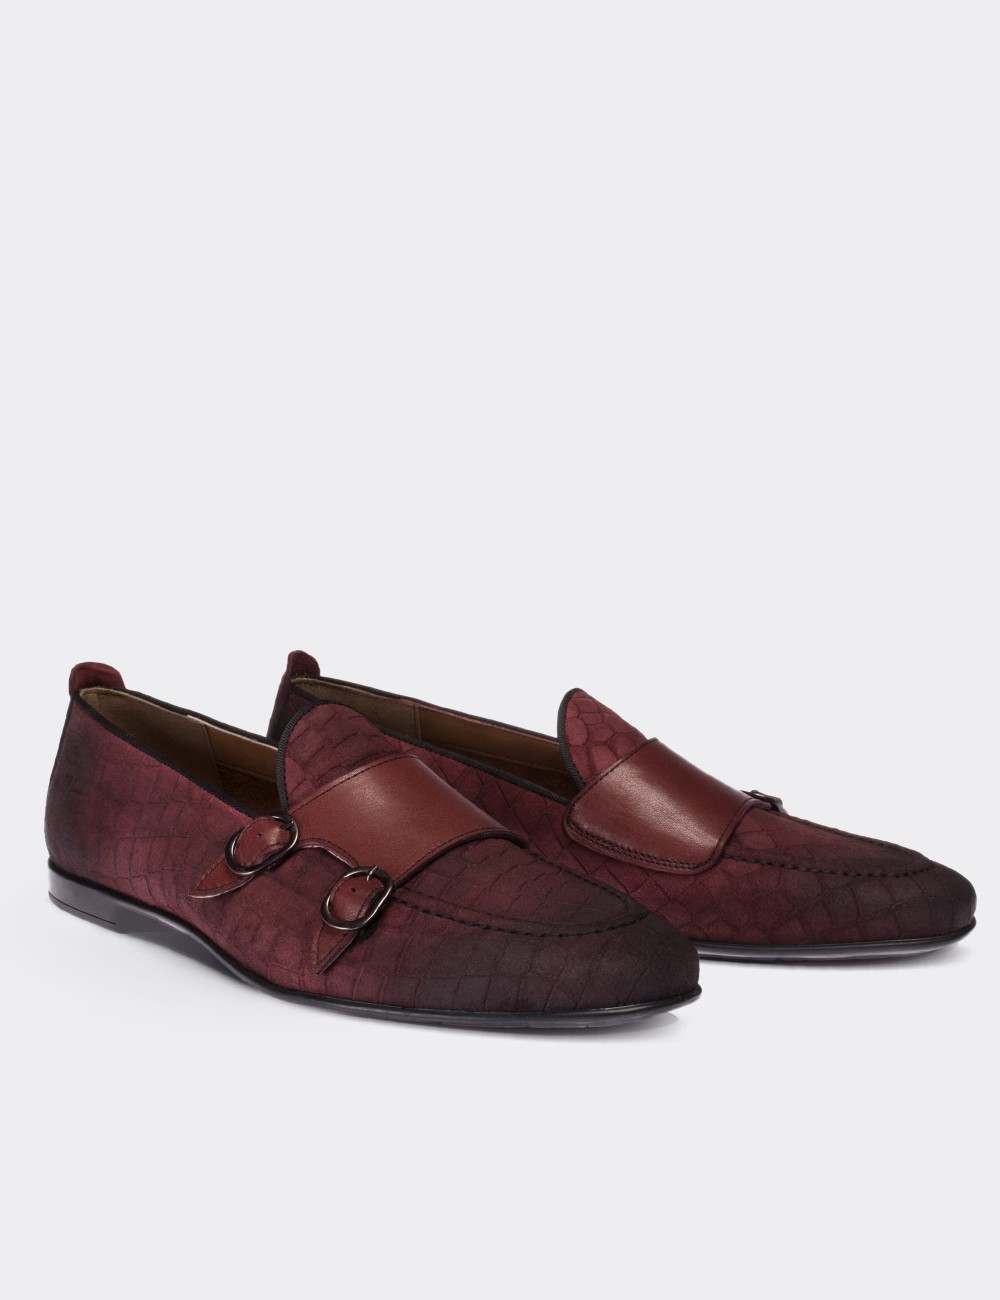 Burgundy Suede Leather Loafers - 01704MBRDC01